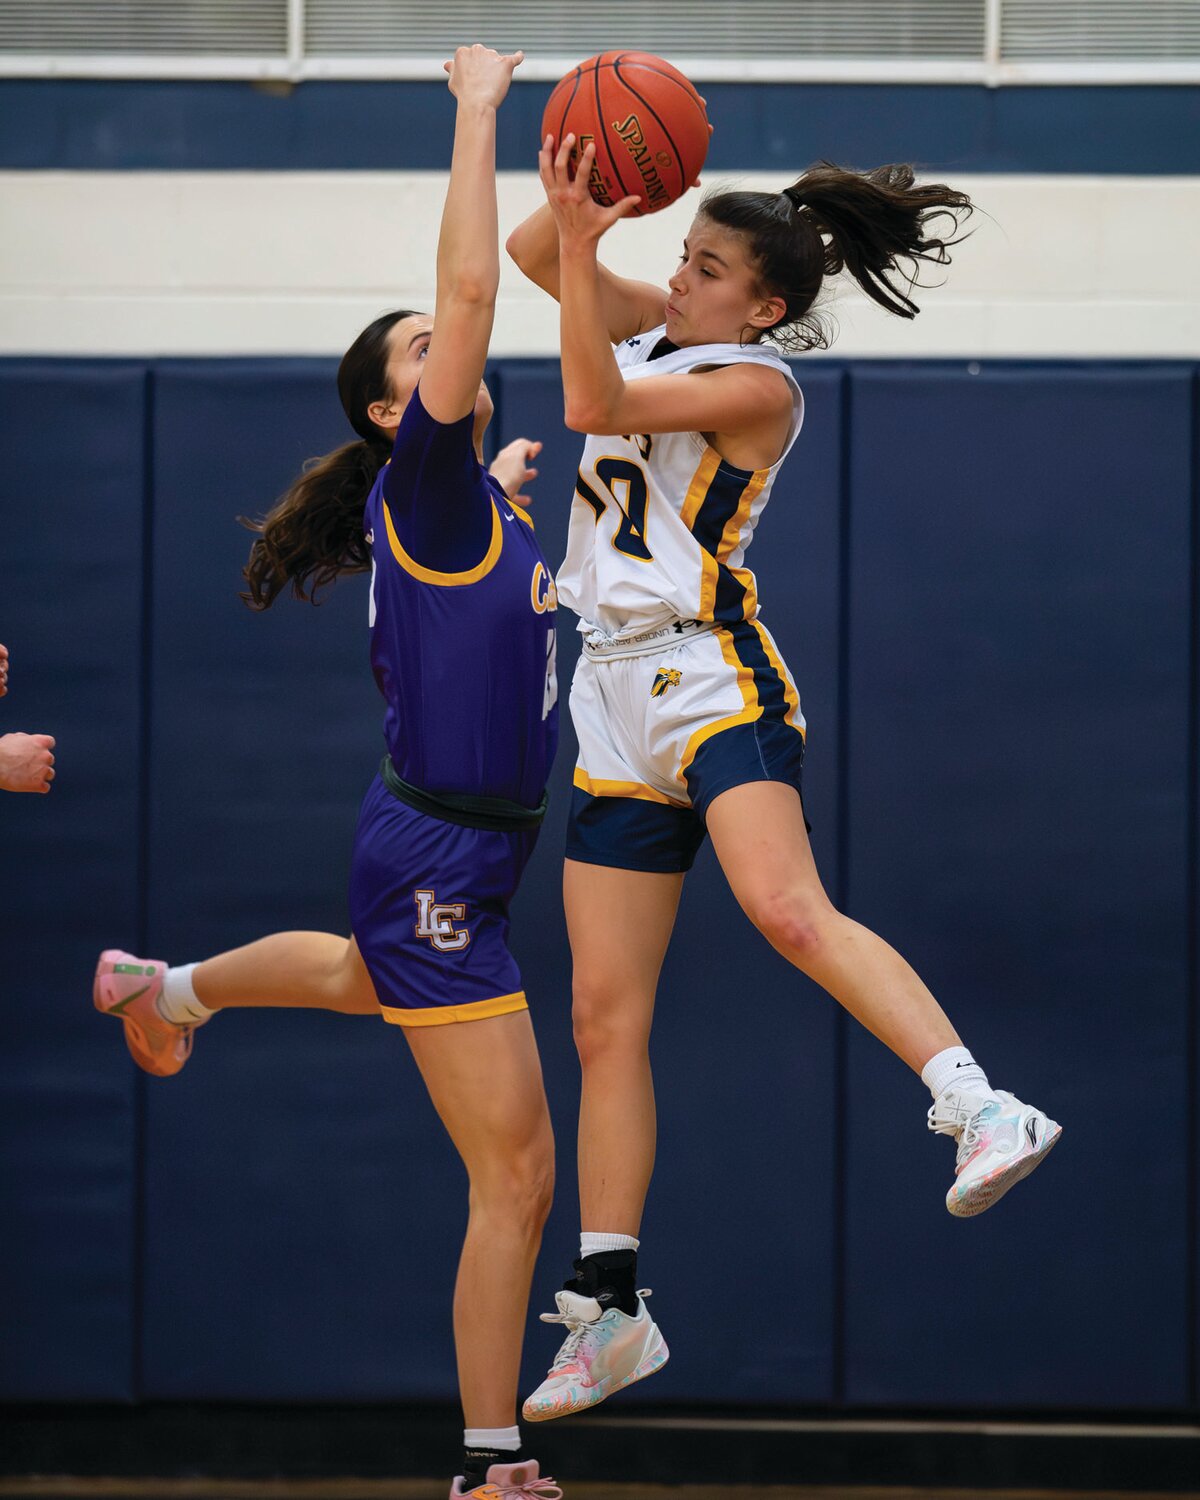 New Hope-Solebury’s Isabella Elizondo gets to an offensive rebound in front of Lancaster Catholic’s Gemma Navickas in the first quarter.